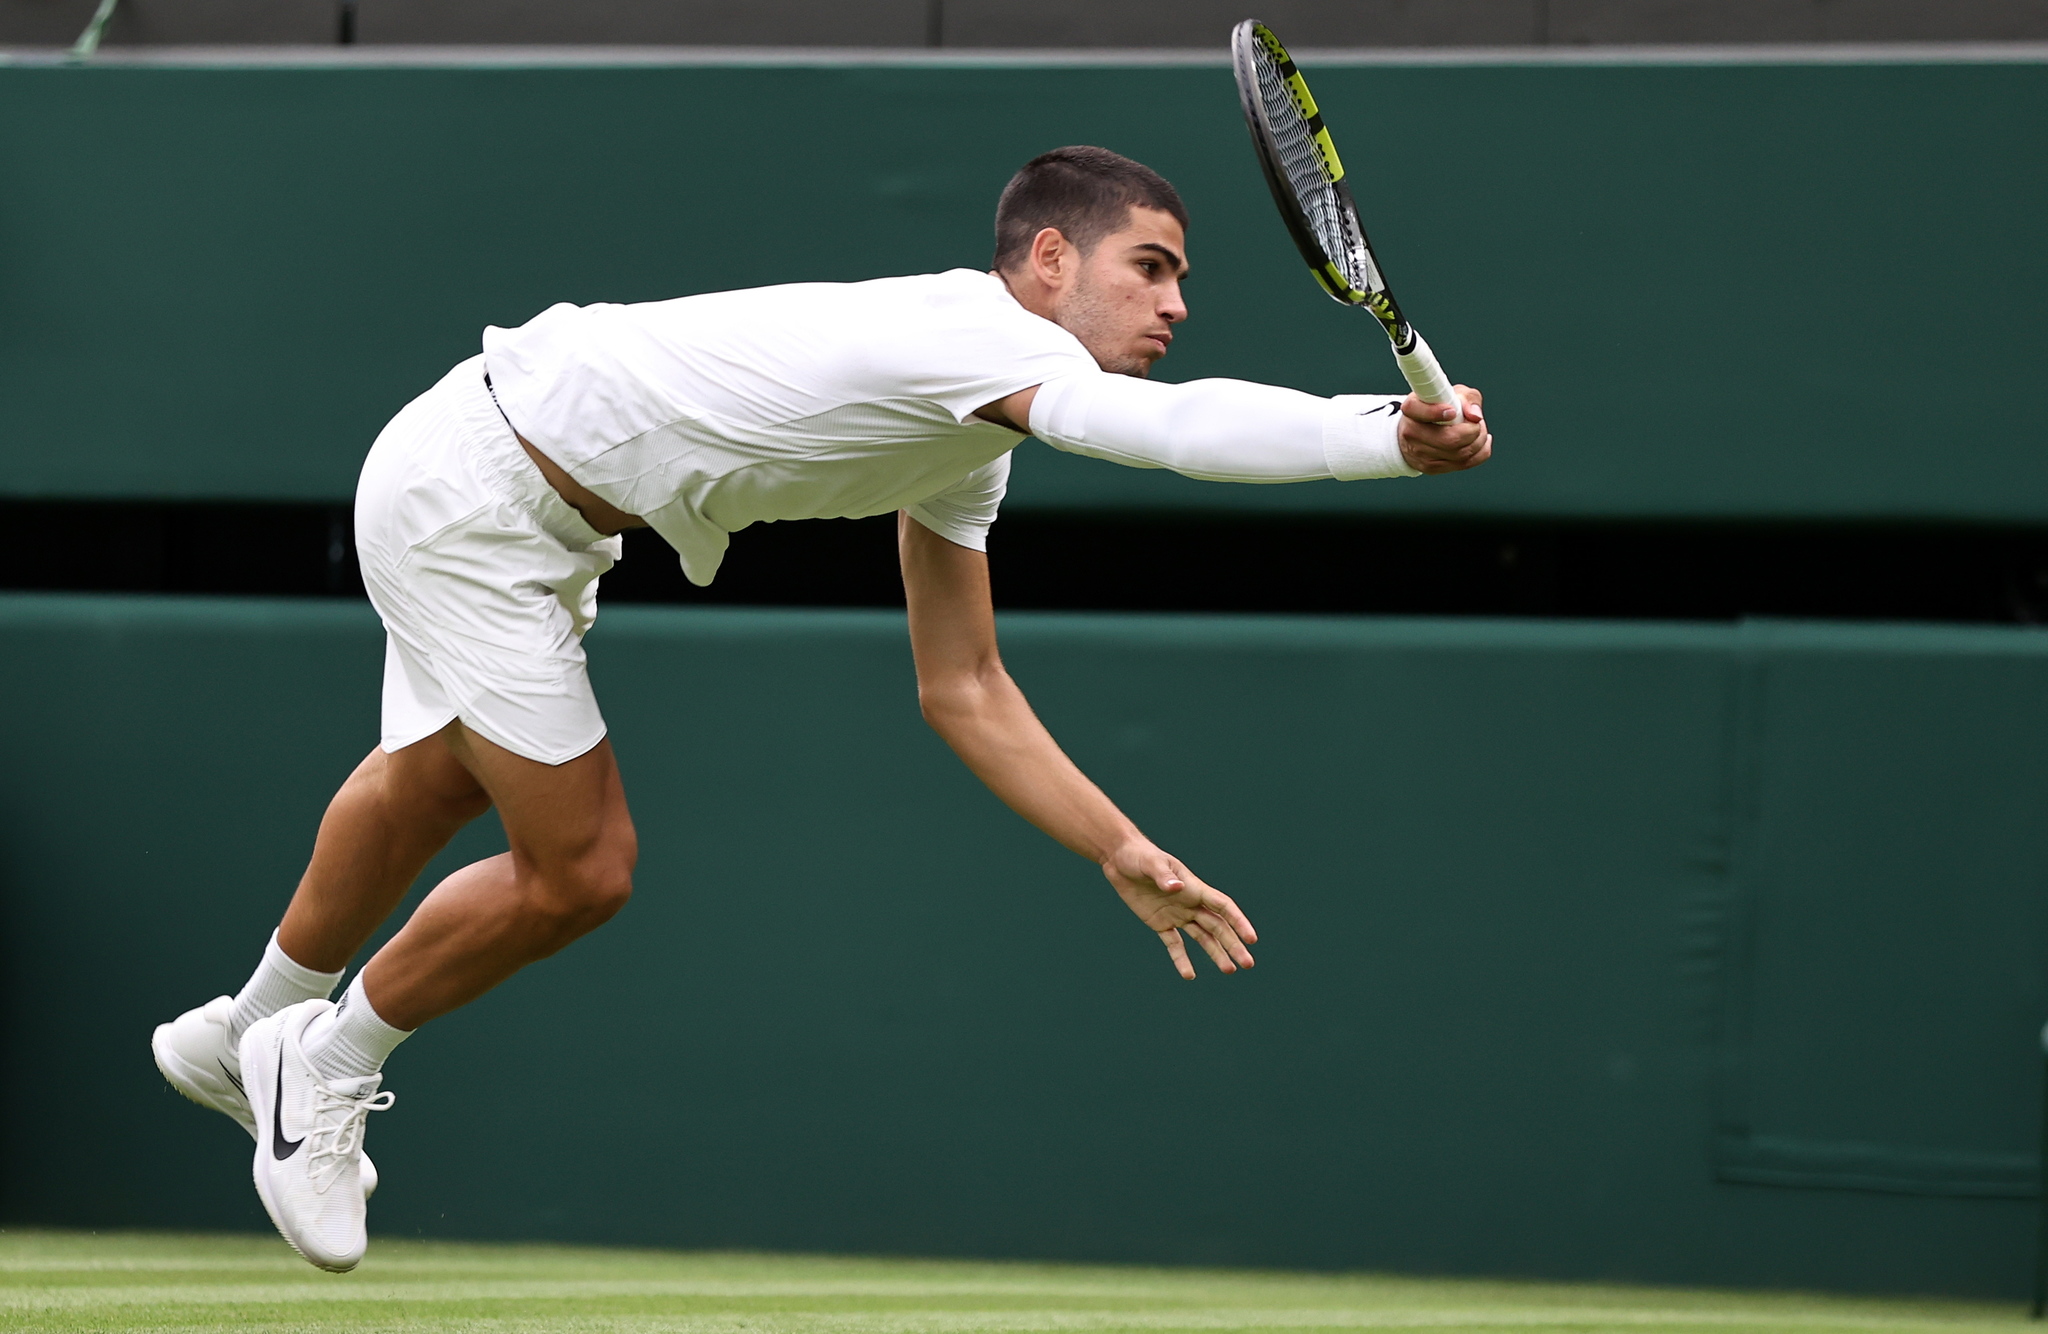 Wimbledon (United Kingdom), 27/06/2022.- Carlos  lt;HIT gt;Alcaraz lt;/HIT gt; of Spain in action in the men's first round match against Jan-Lennard Struff of Germany at the Wimbledon Championships, in Wimbledon, Britain, 27 June 2022. (Tenis, Alemania, España, Reino Unido) EFE/EPA/KIERAN GALVIN EDITORIAL USE ONLY